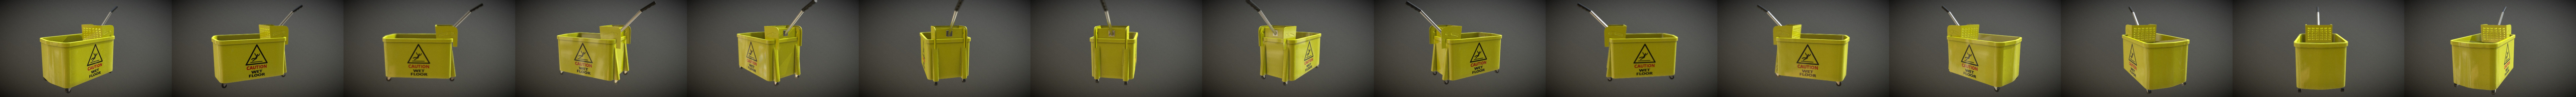 Bucket And Mop 1A - 3D Model by weeray